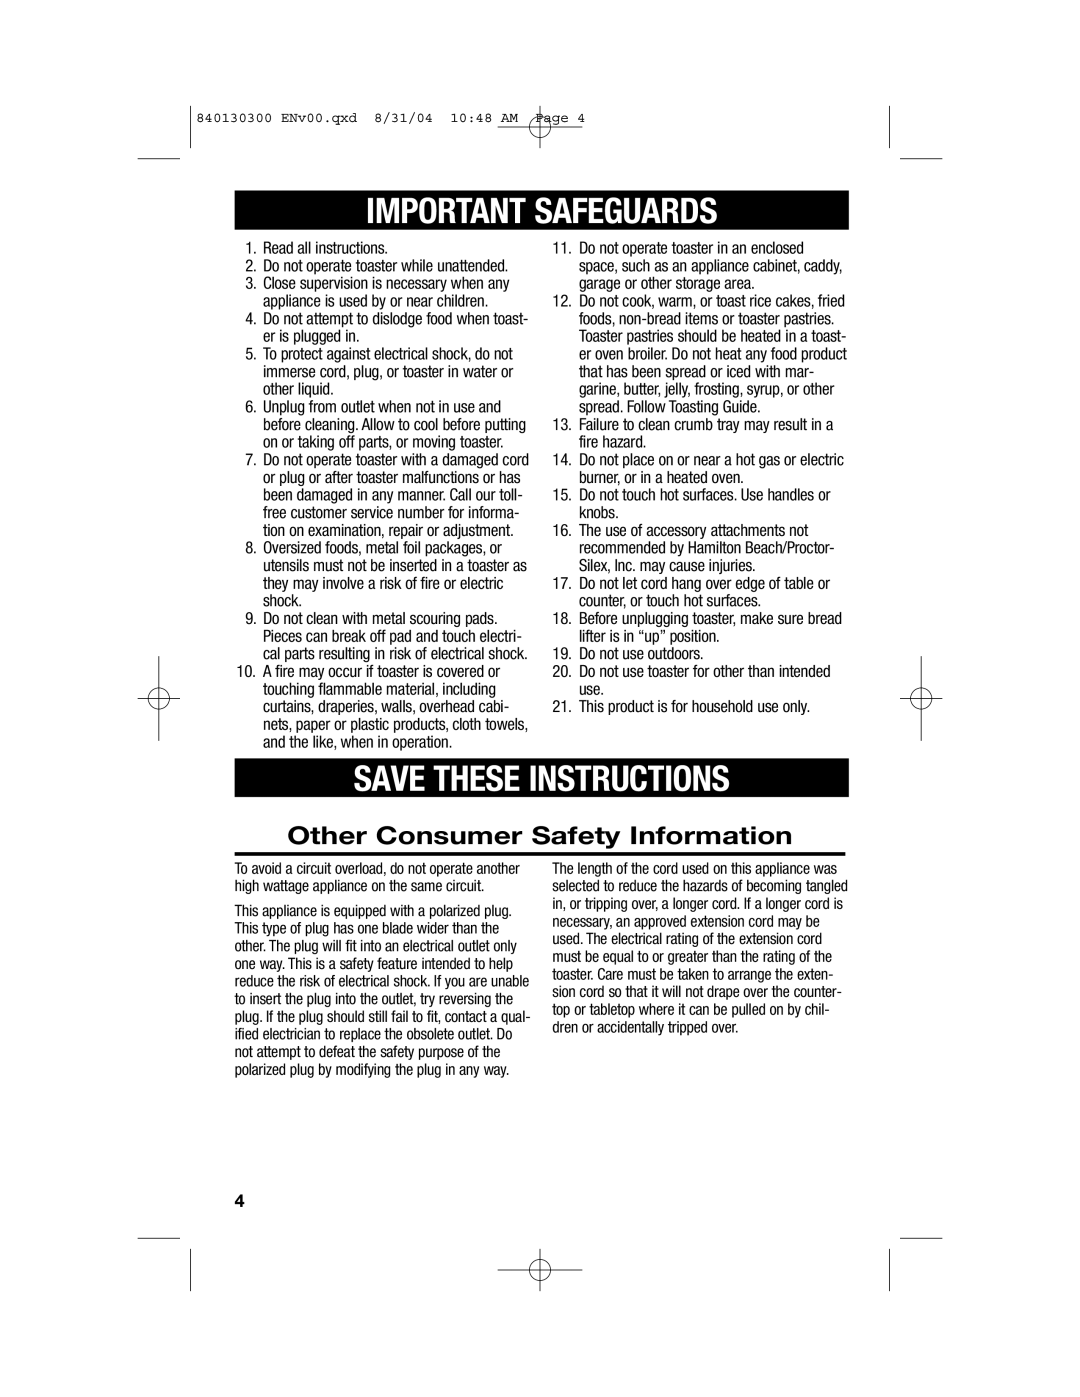 Hamilton Beach All-Metal Toasters manual Important Safeguards, Save These Instructions, Other Consumer Safety Information 